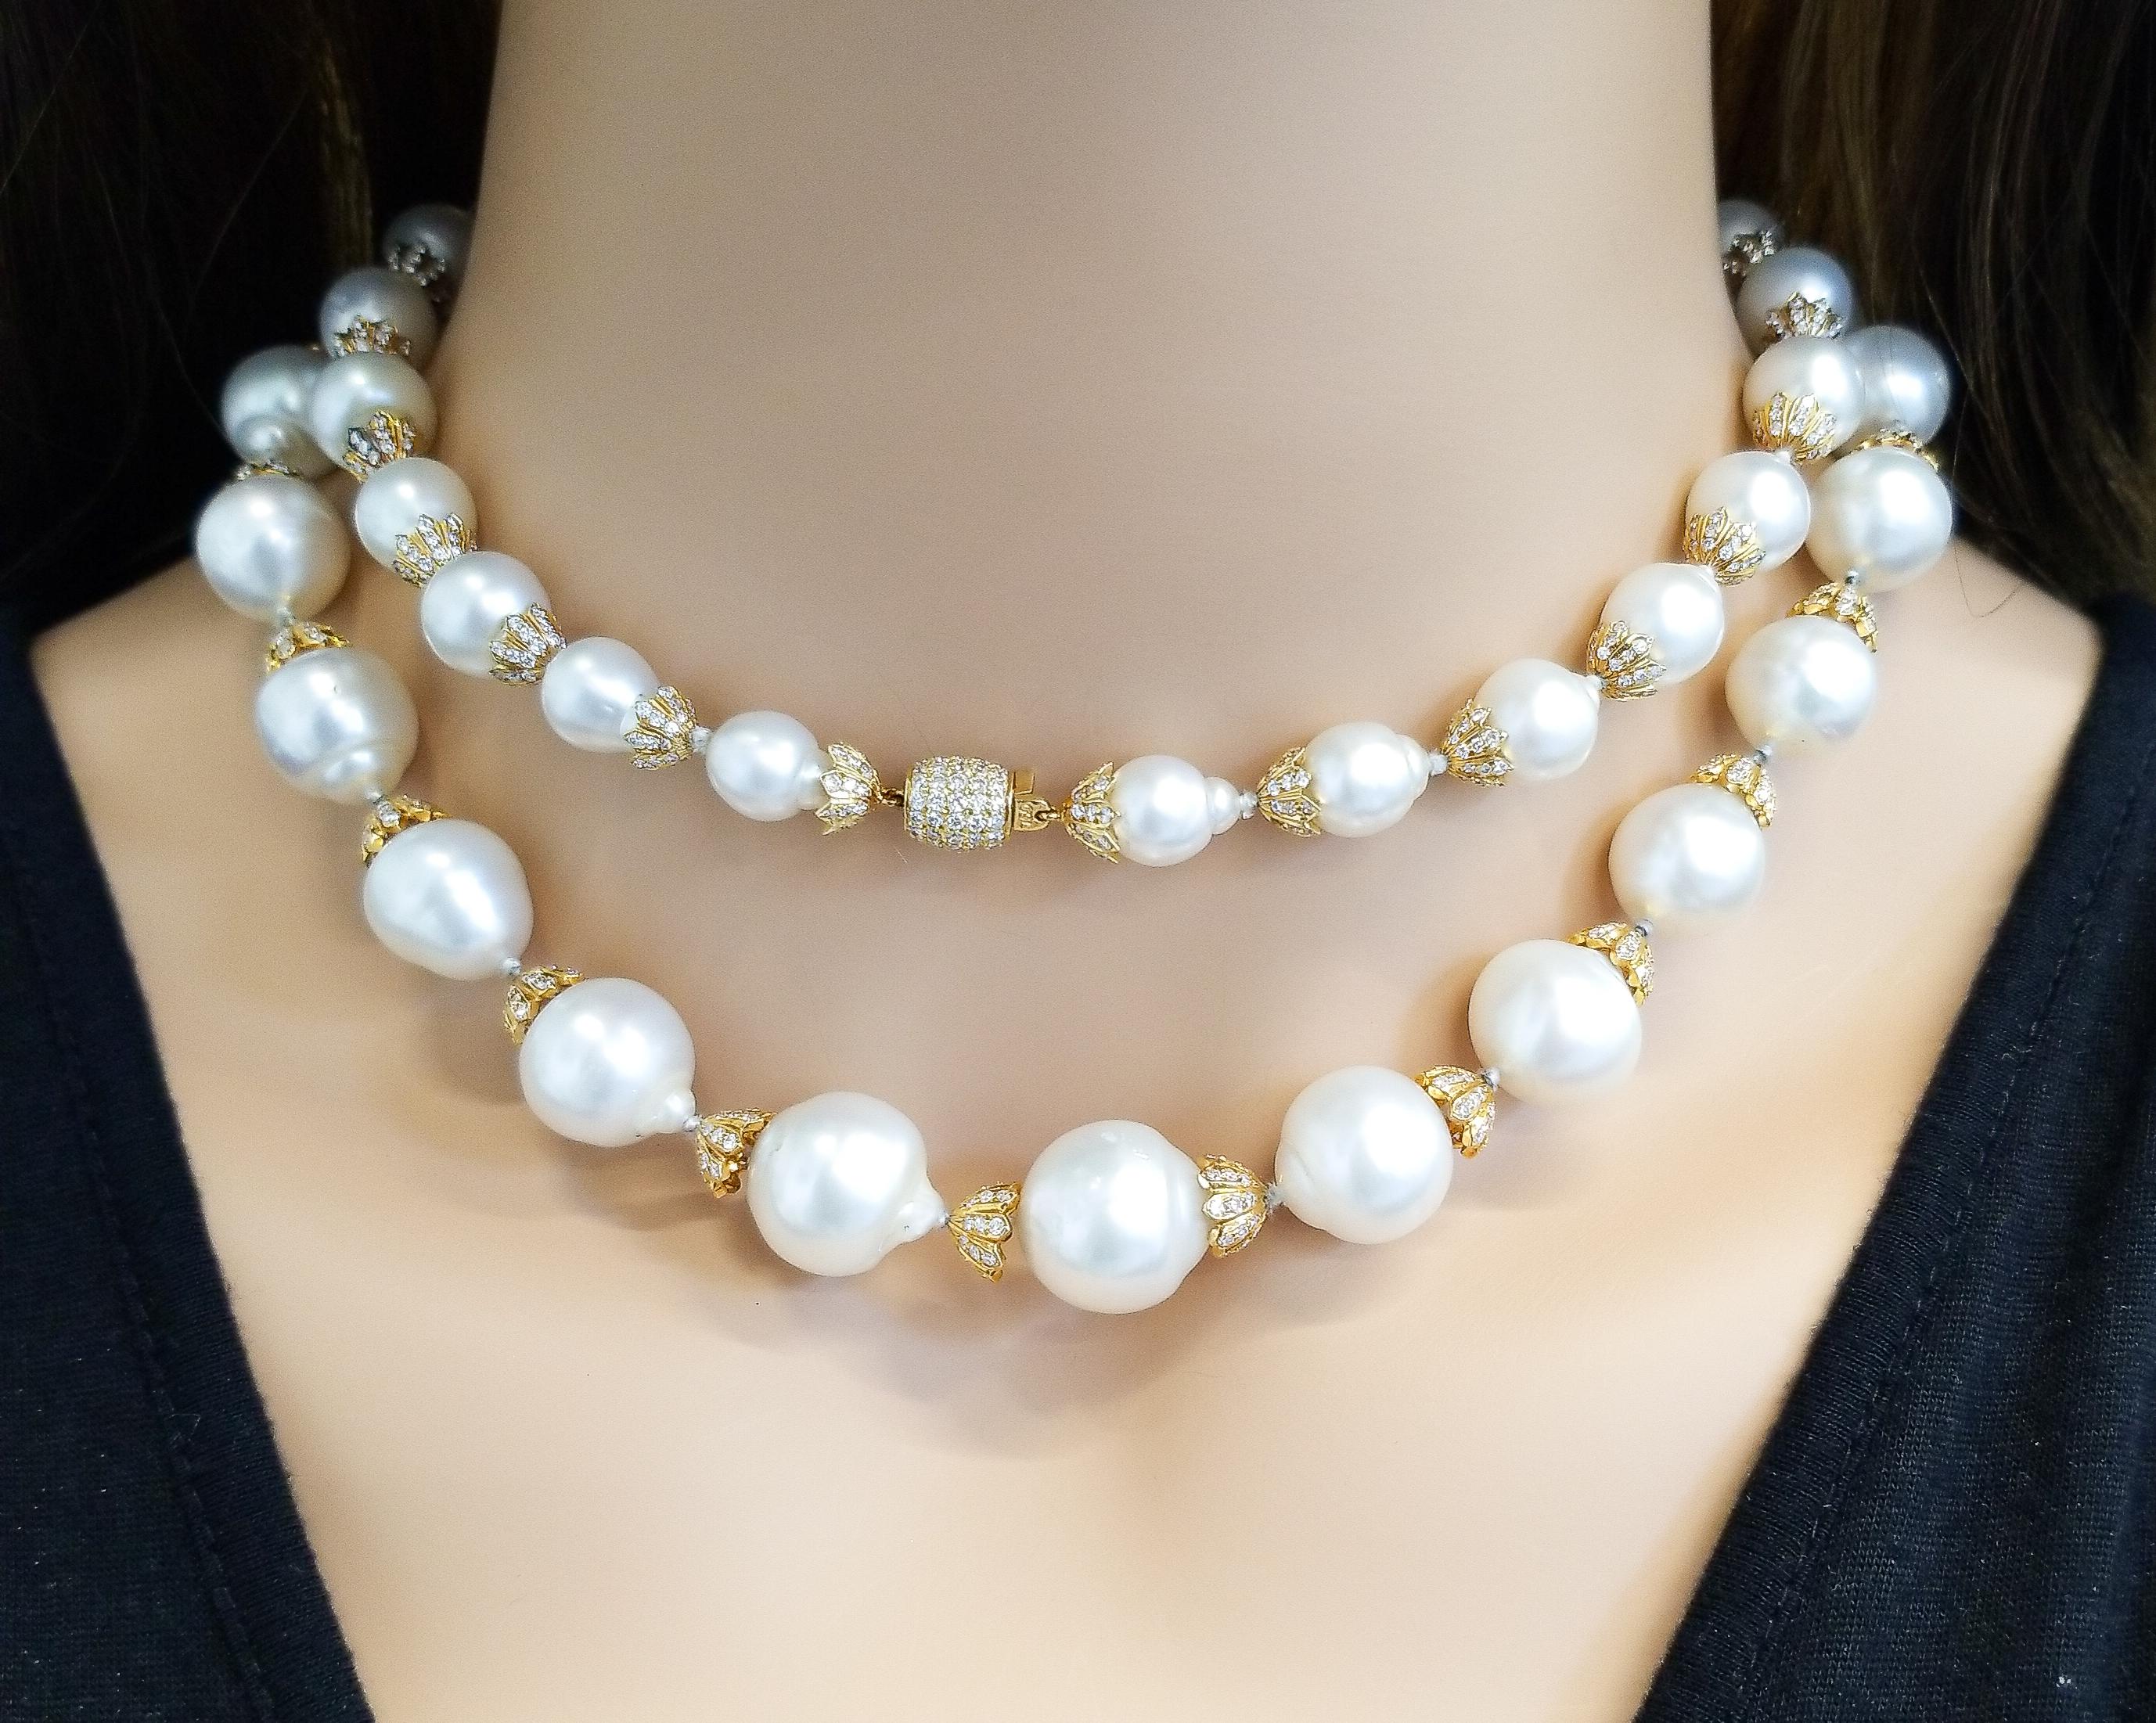 Contemporary Australian South Sea Pearl and Diamond Necklace with 18 Karat White Gold Clasp